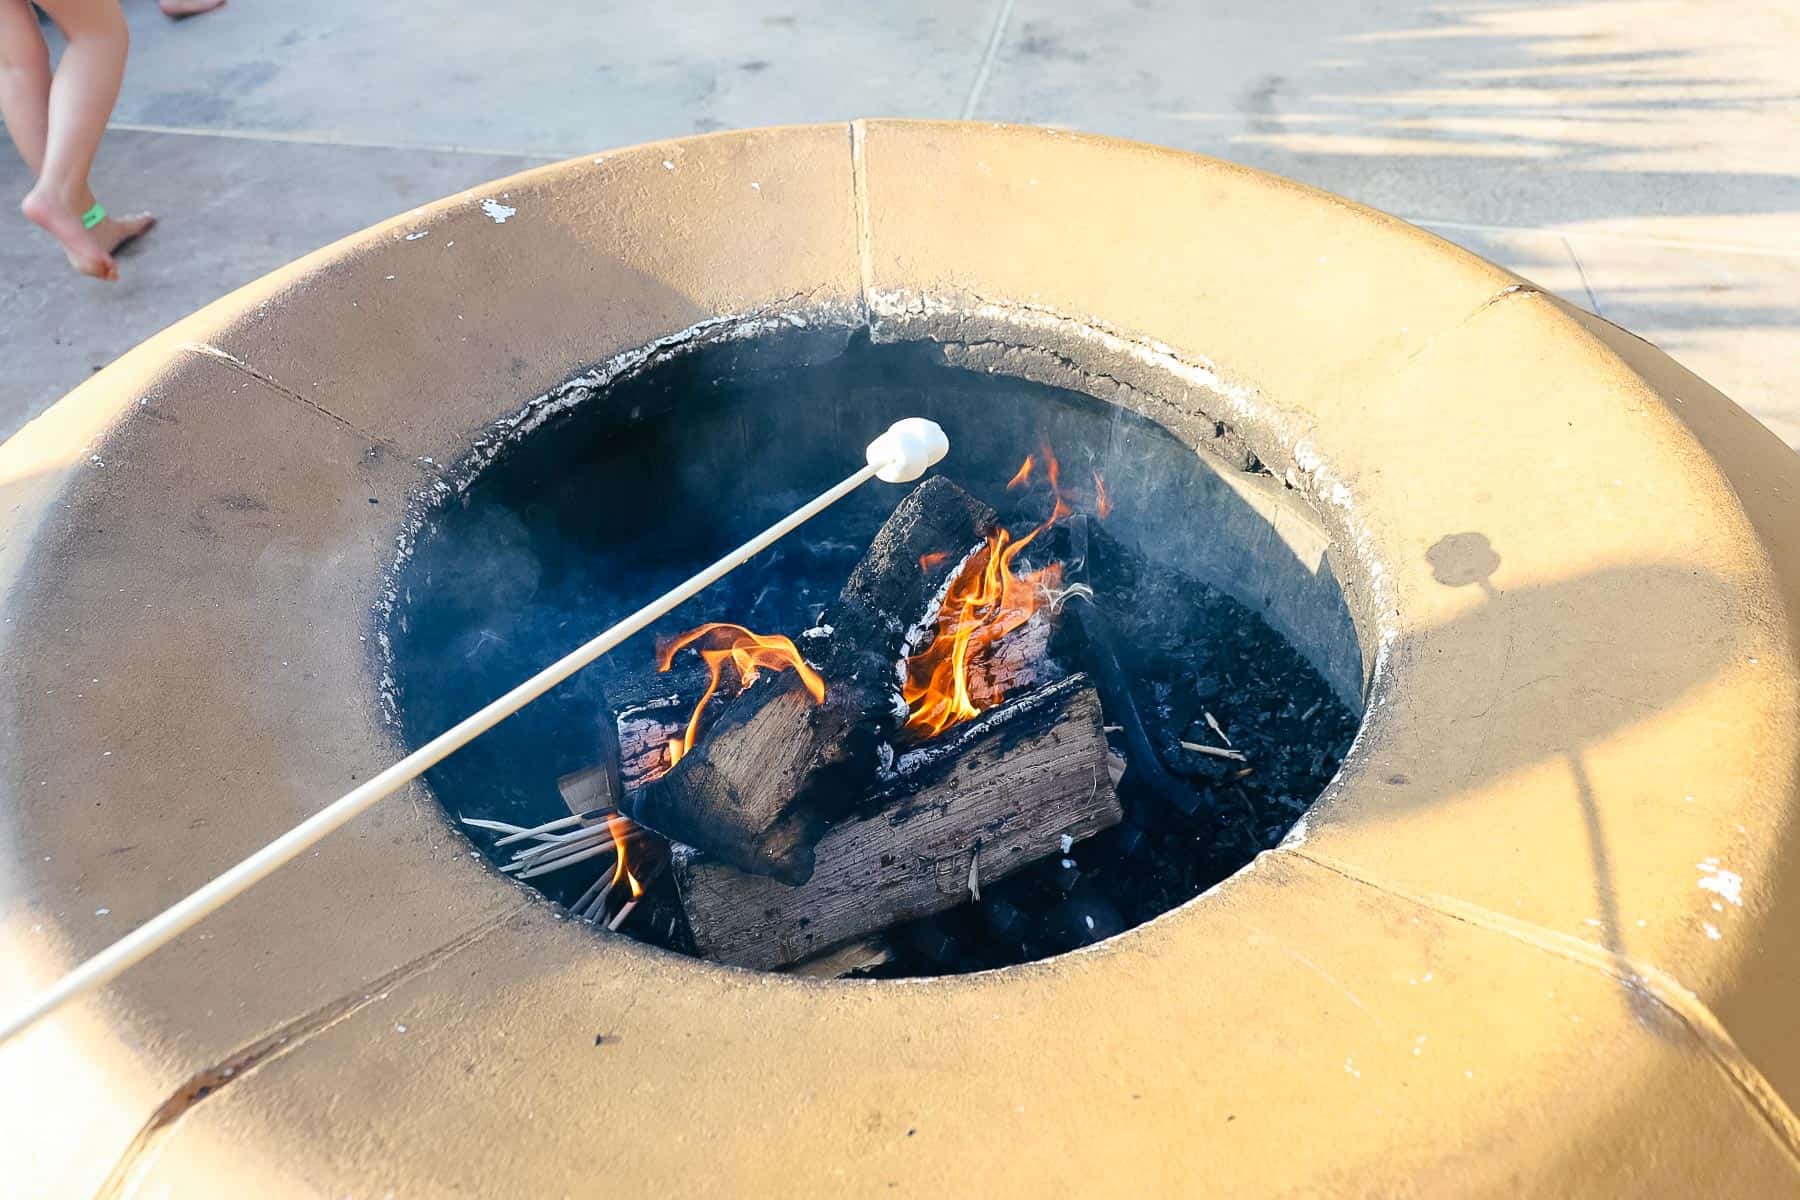 roasting a marshmallow over the fire 